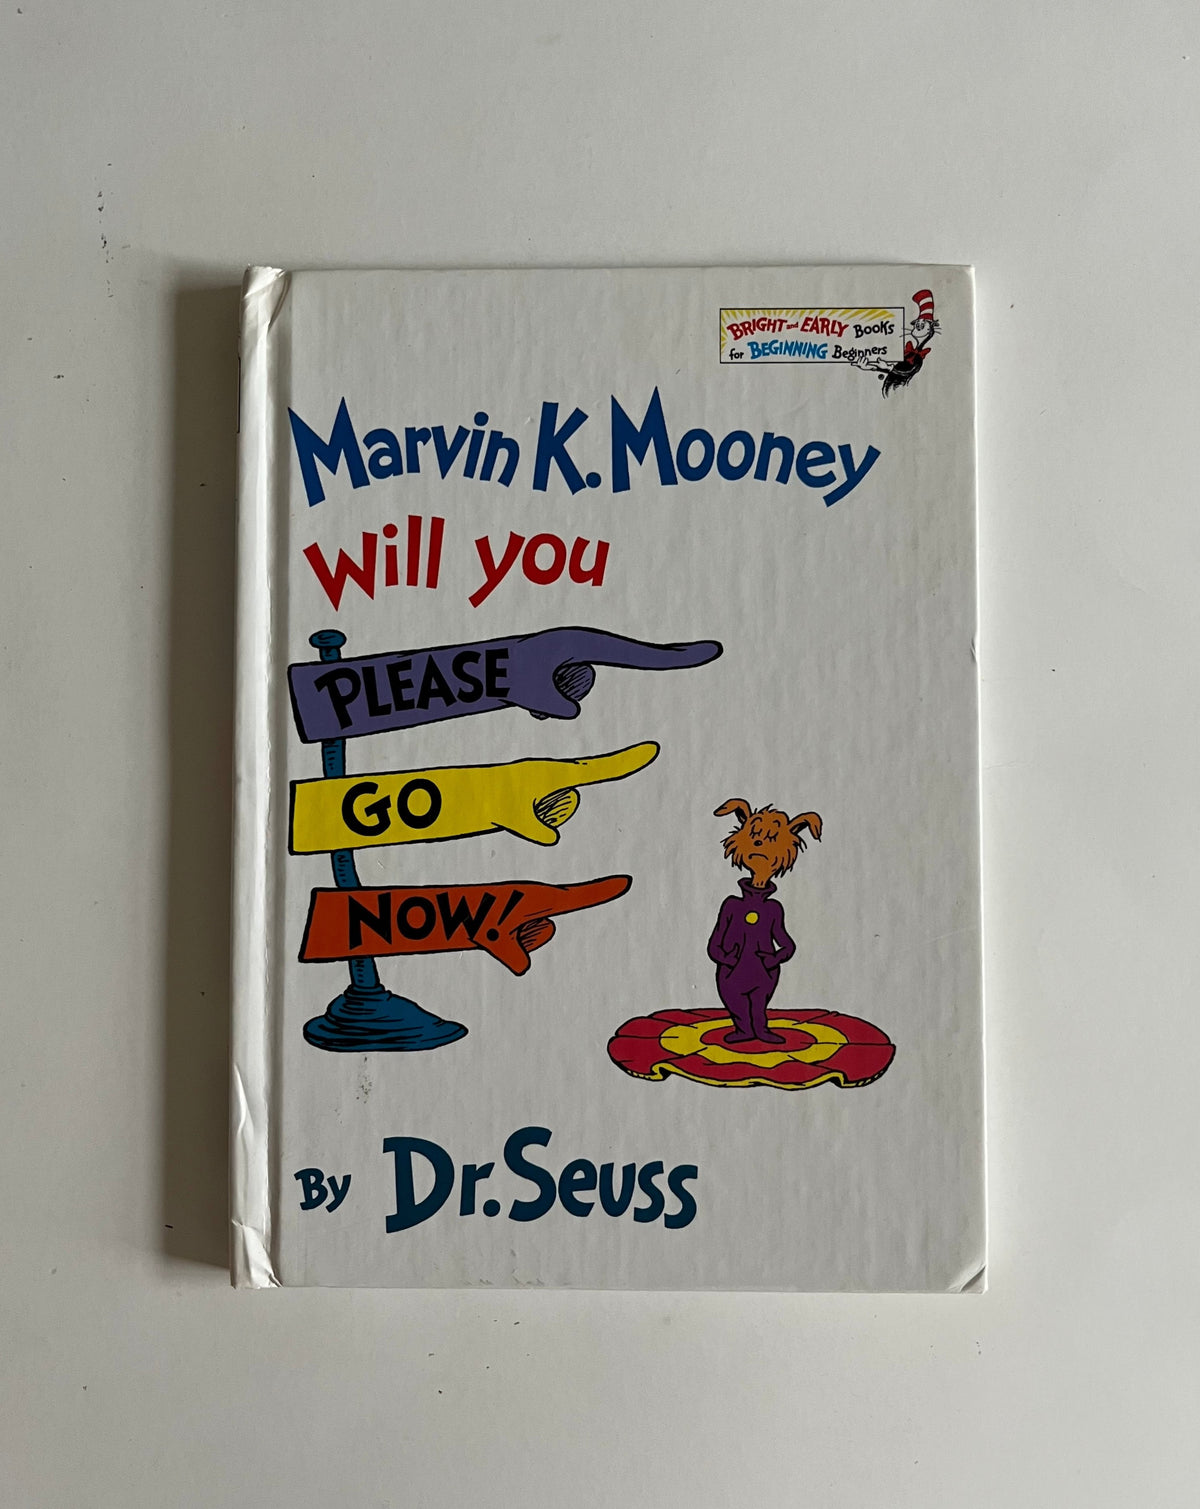 Marvin K. Mooney Will You Please Go Now by Dr. Seuss